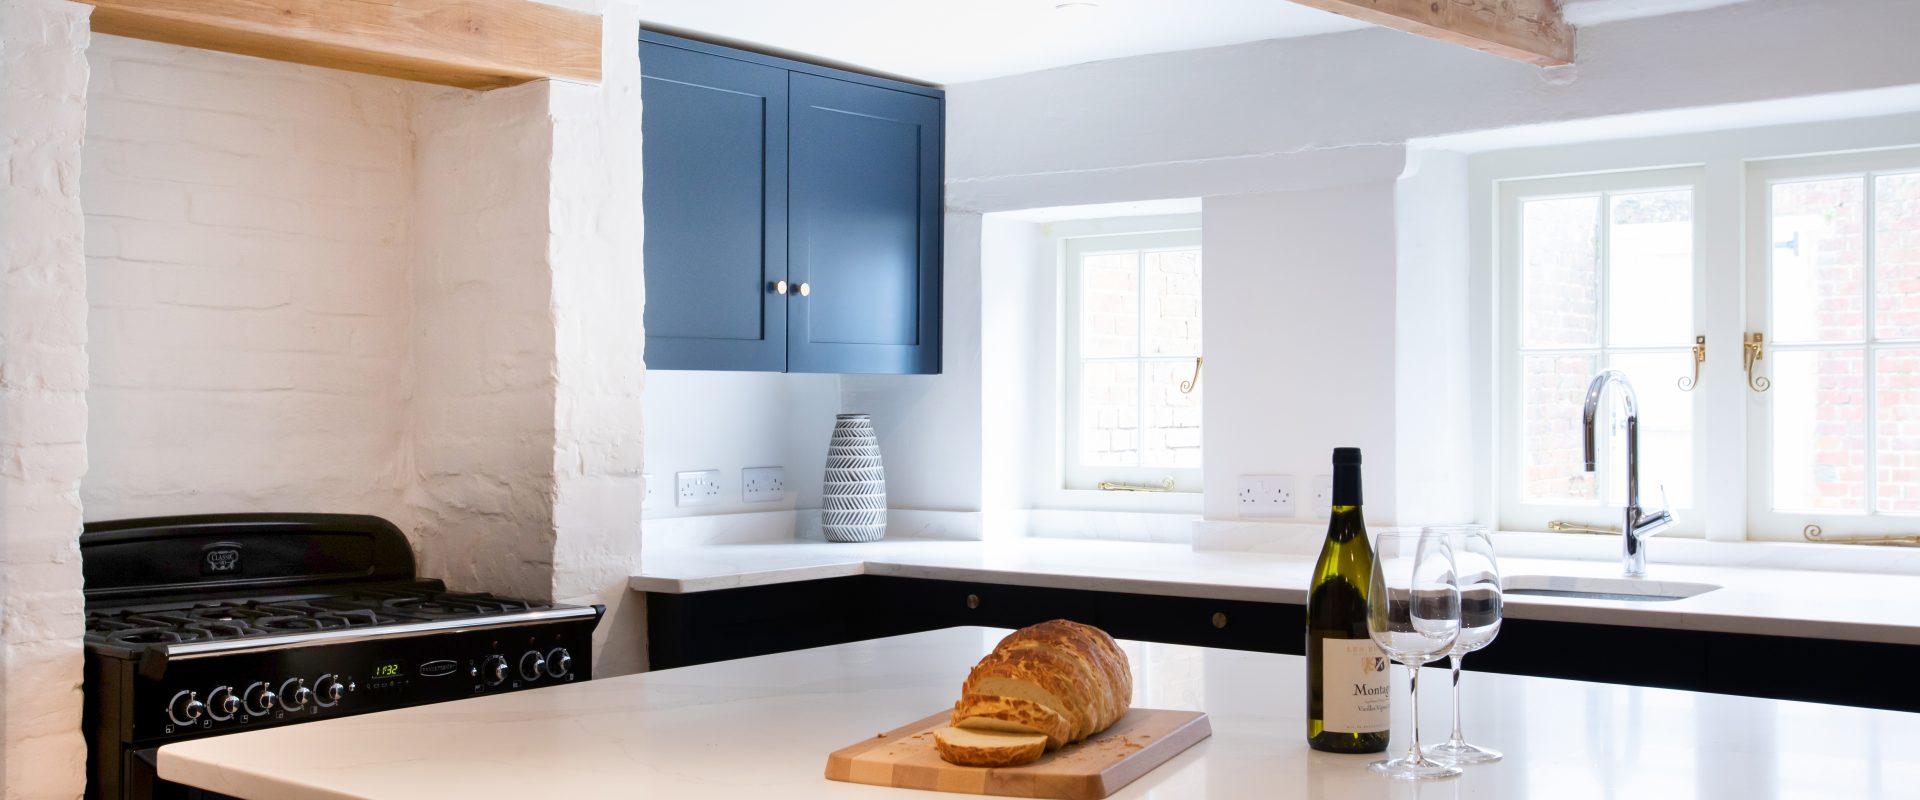 Holiday Home Management | Kitchen | The Bakery | Arundel Holiday Homes | Simple Getaway